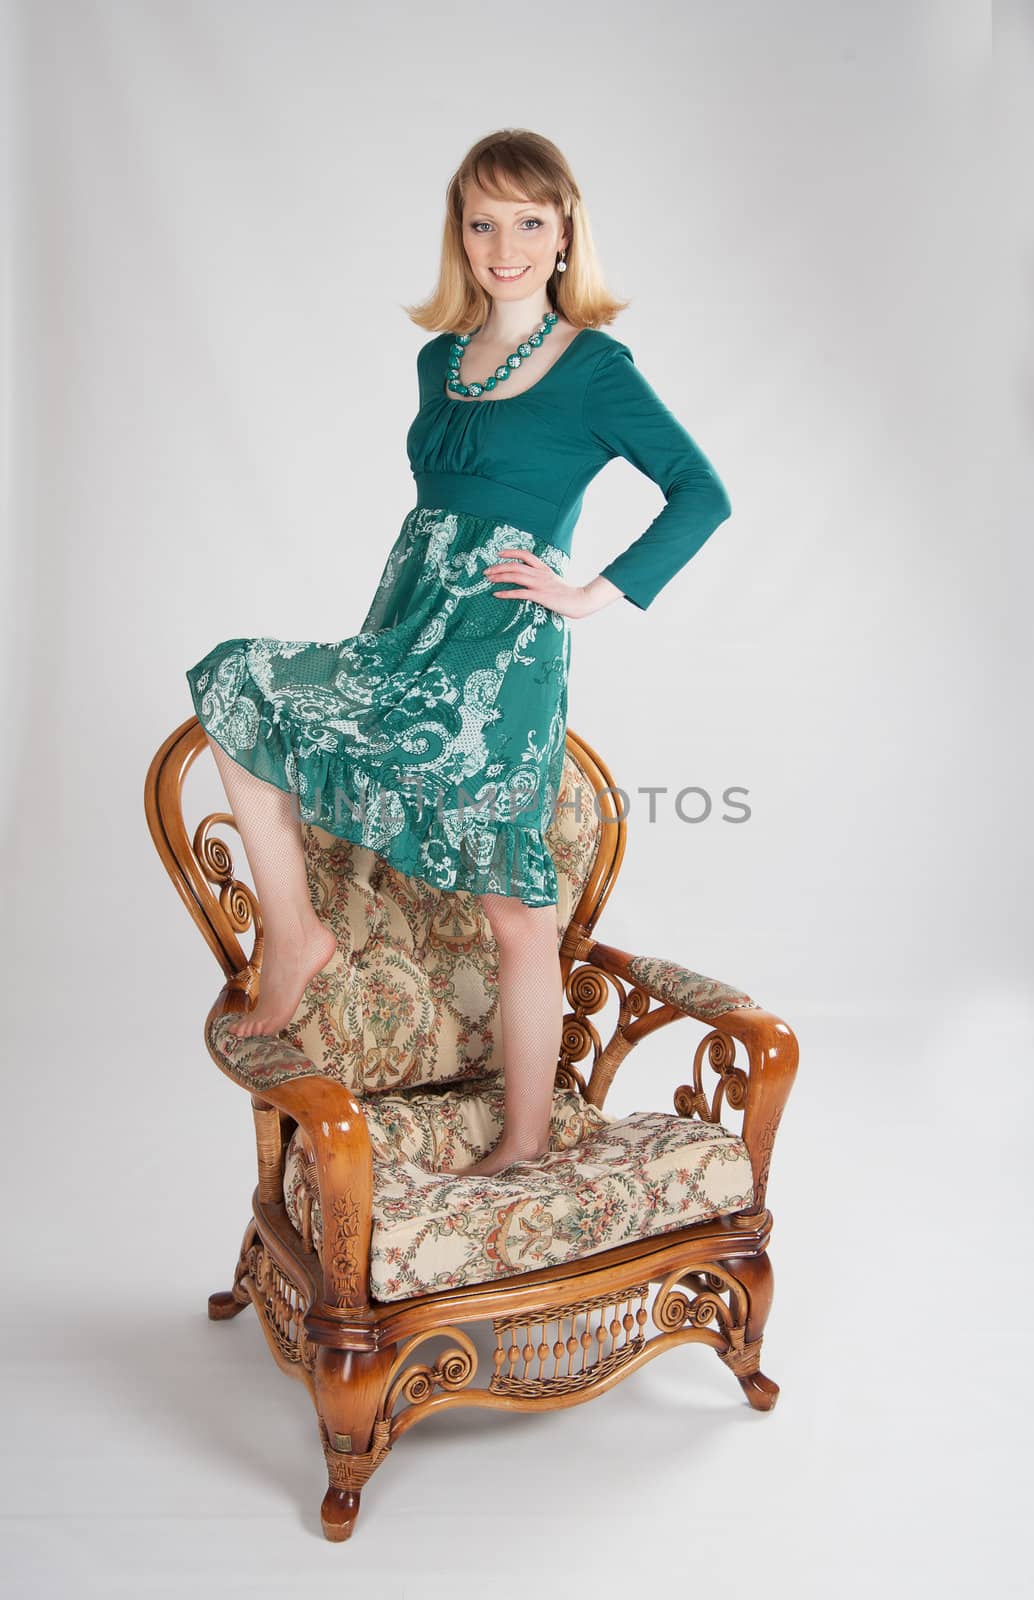 l woman in a green dress sitting on a chair by raduga21